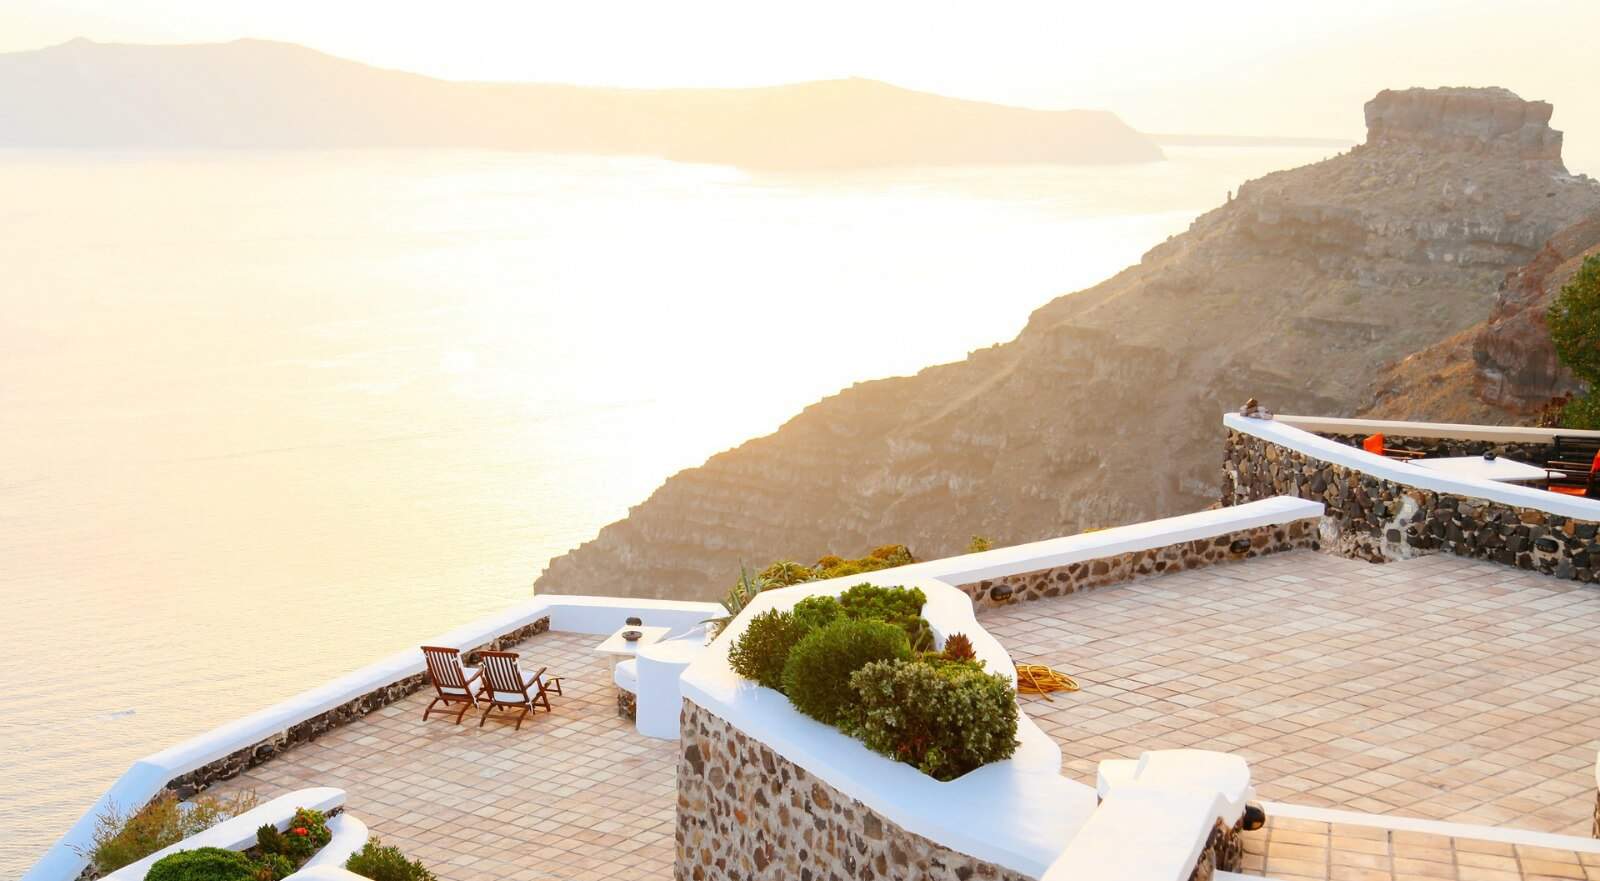 Terrace on mountain overlooking large body of water.